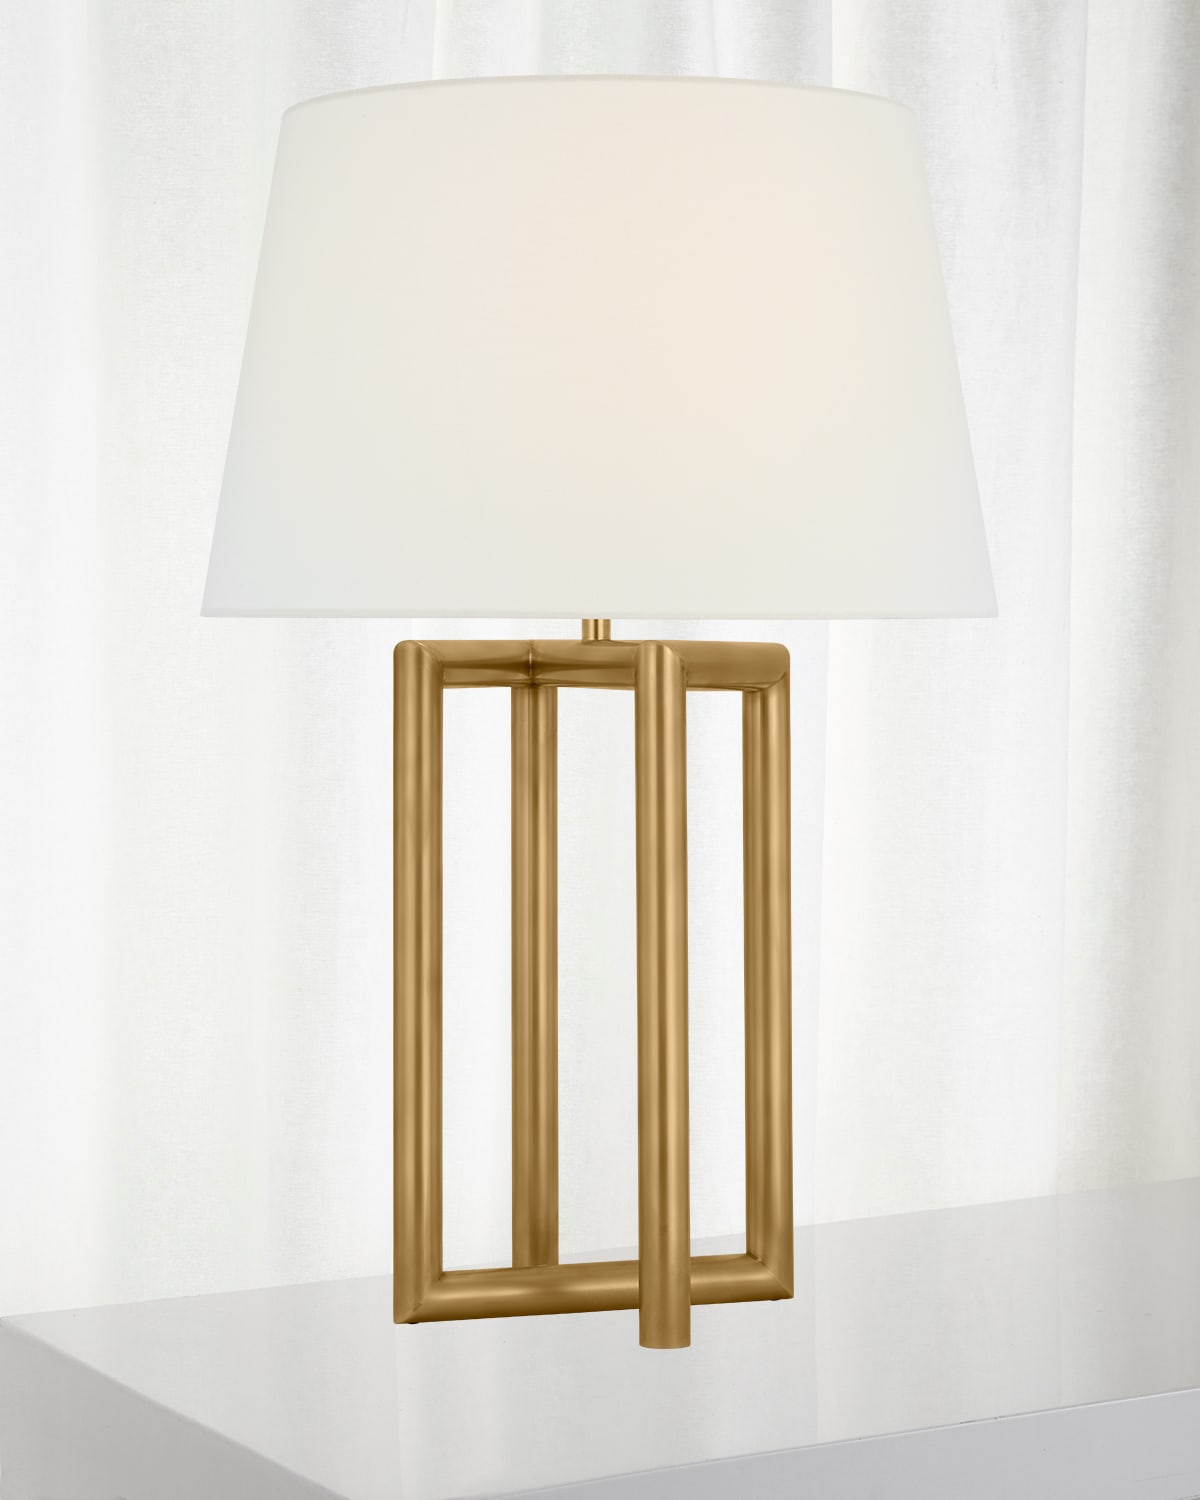 Shop Visual Comfort Signature Concorde Large Table Lamp By Paloma Contreras In Hand-rubbed Antique Brass